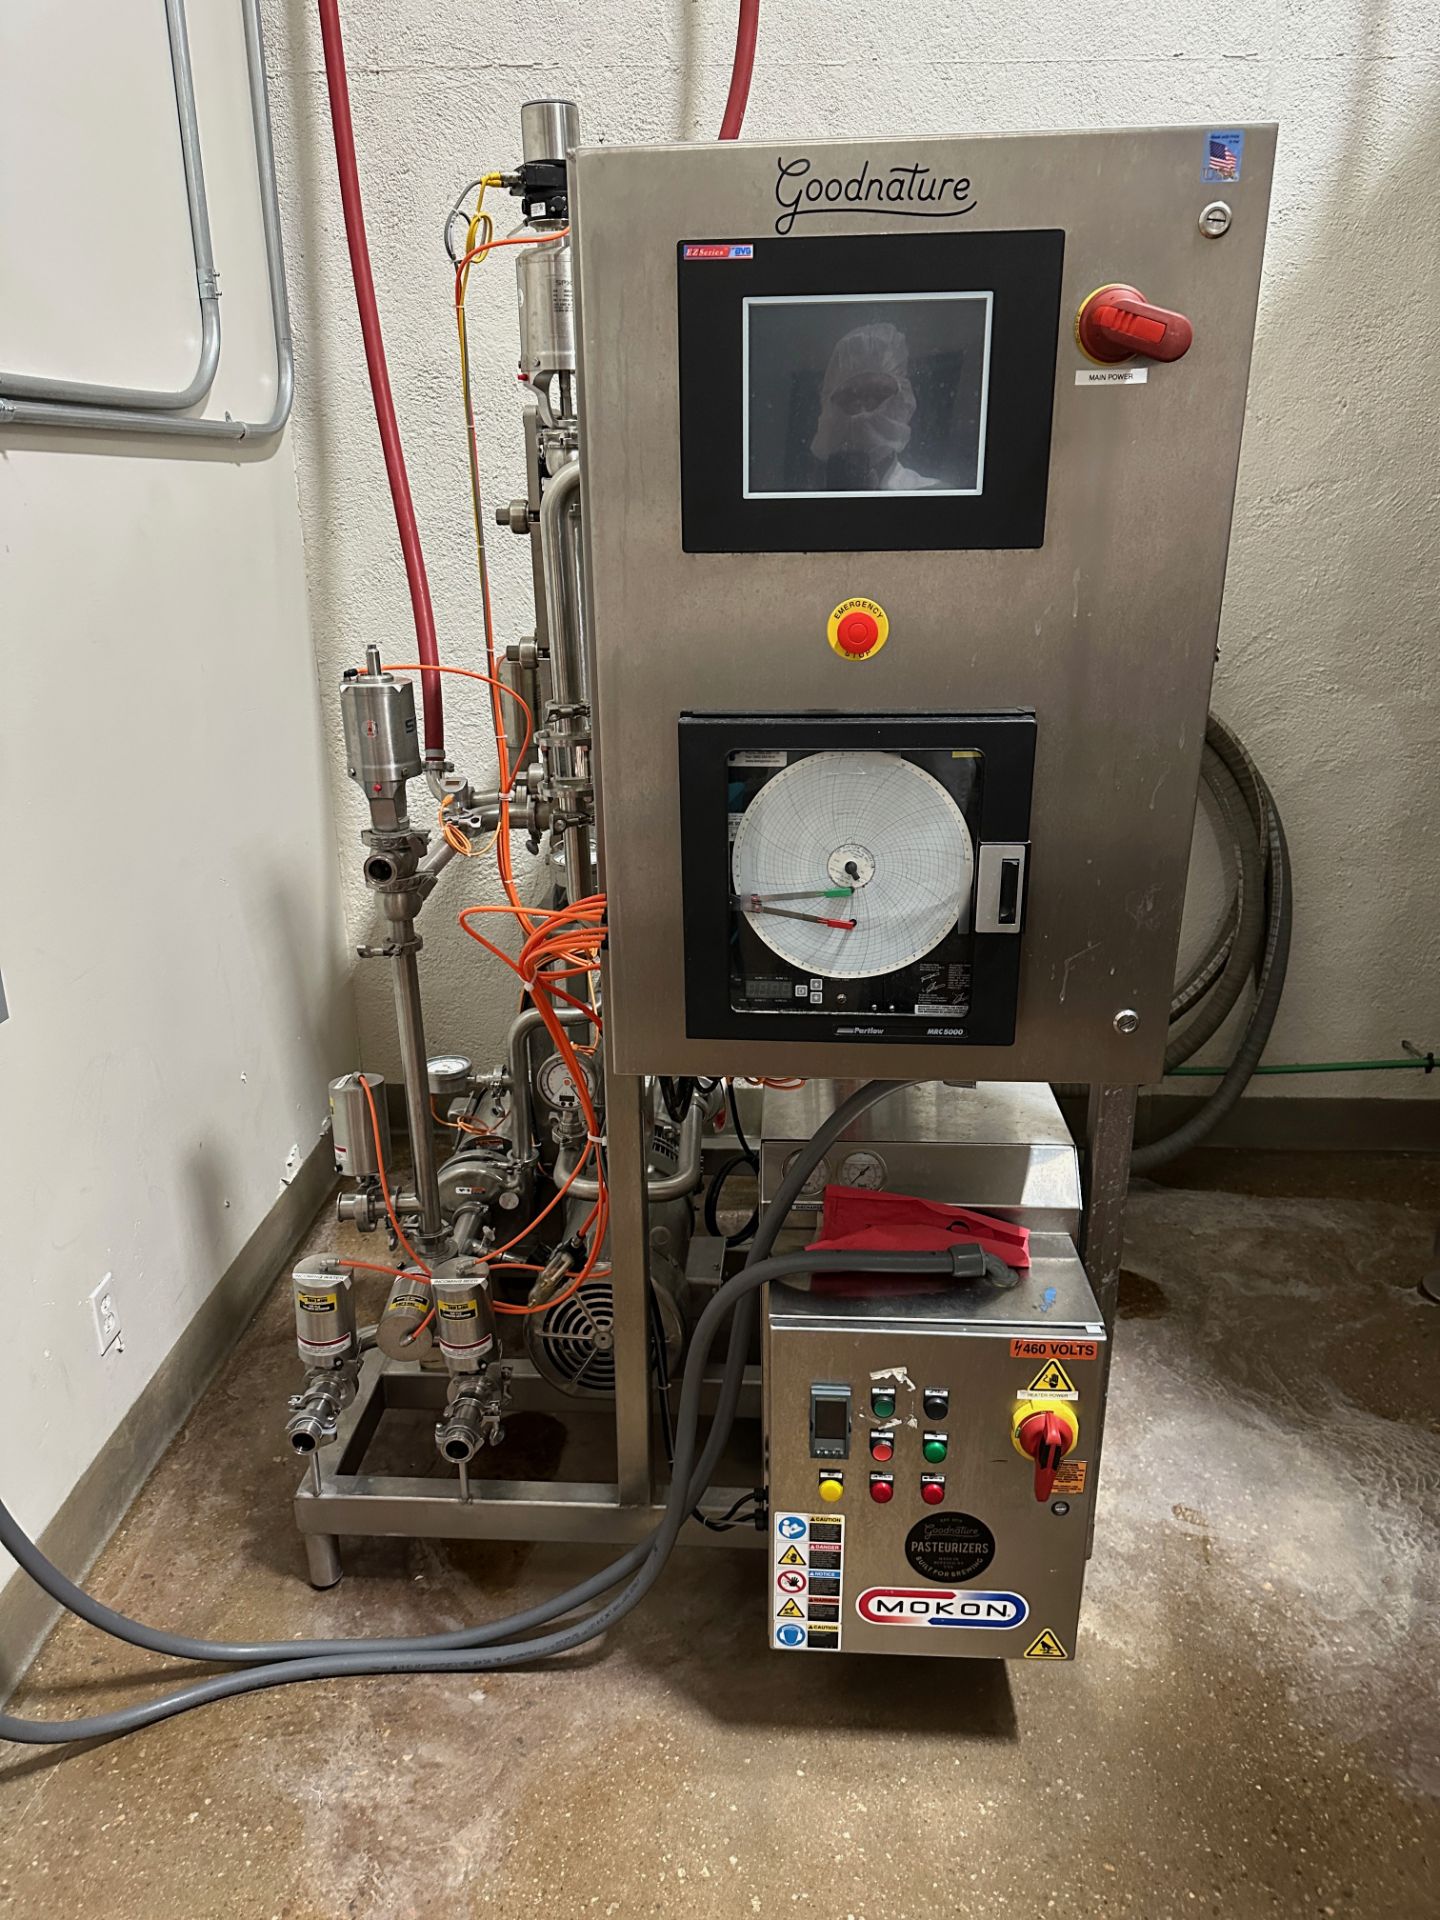 2019 Goodnature CBP 300 Pasteurizer Skid with Alfa Laval Heat Exchanger, Stainless | Rig Fee $350